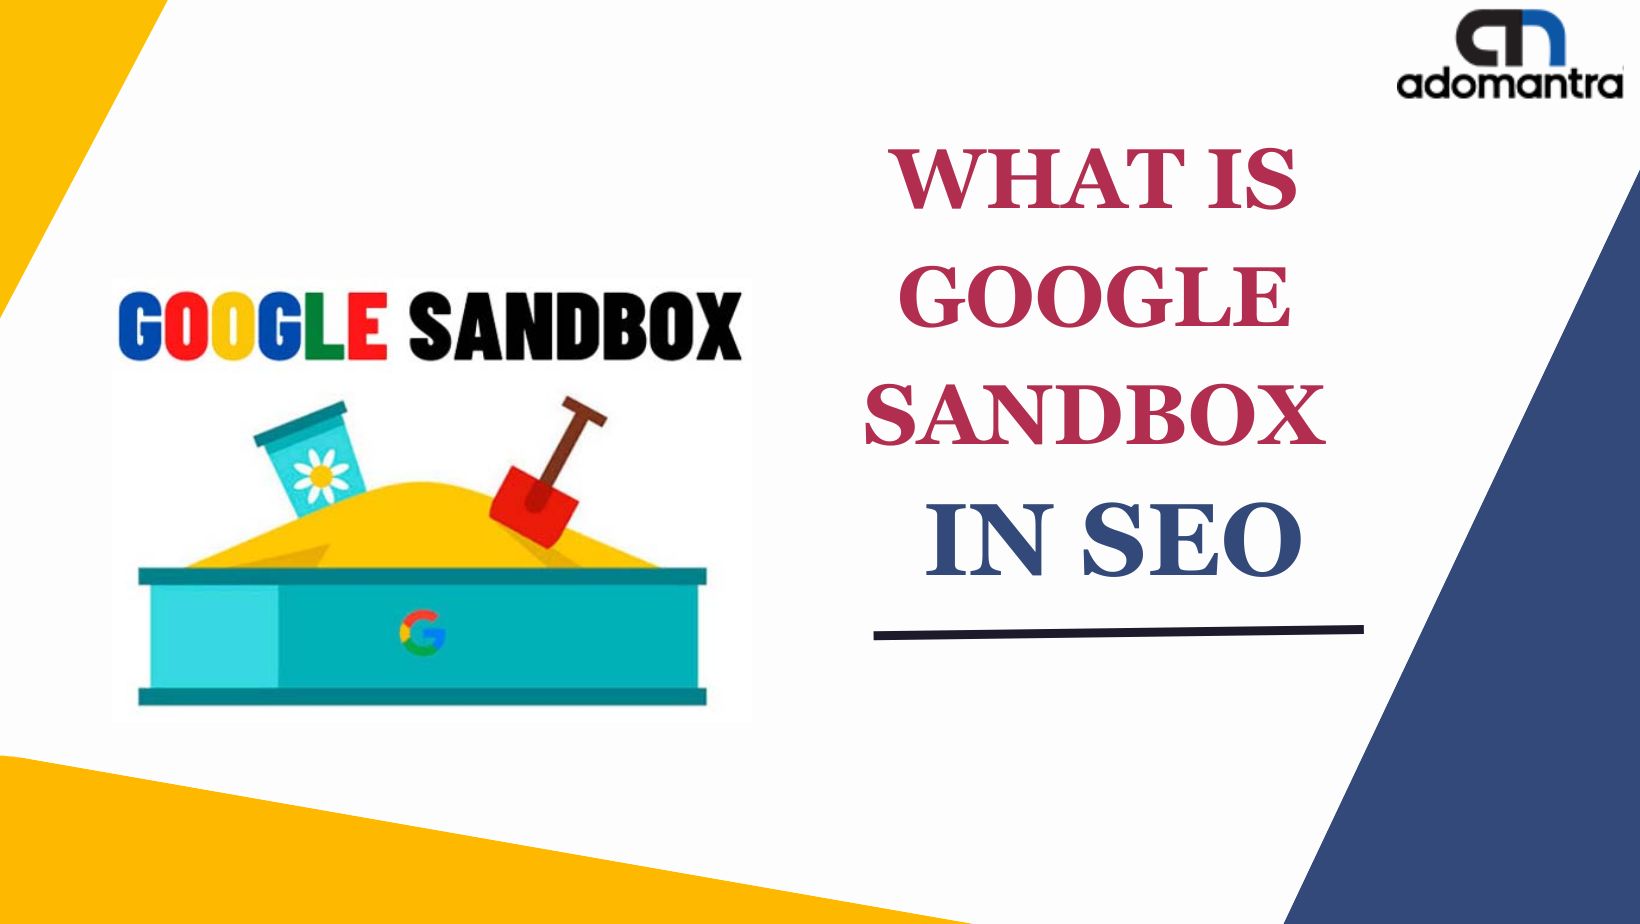 What Is Google Sandbox In SEO? Does It Impact New Websites?